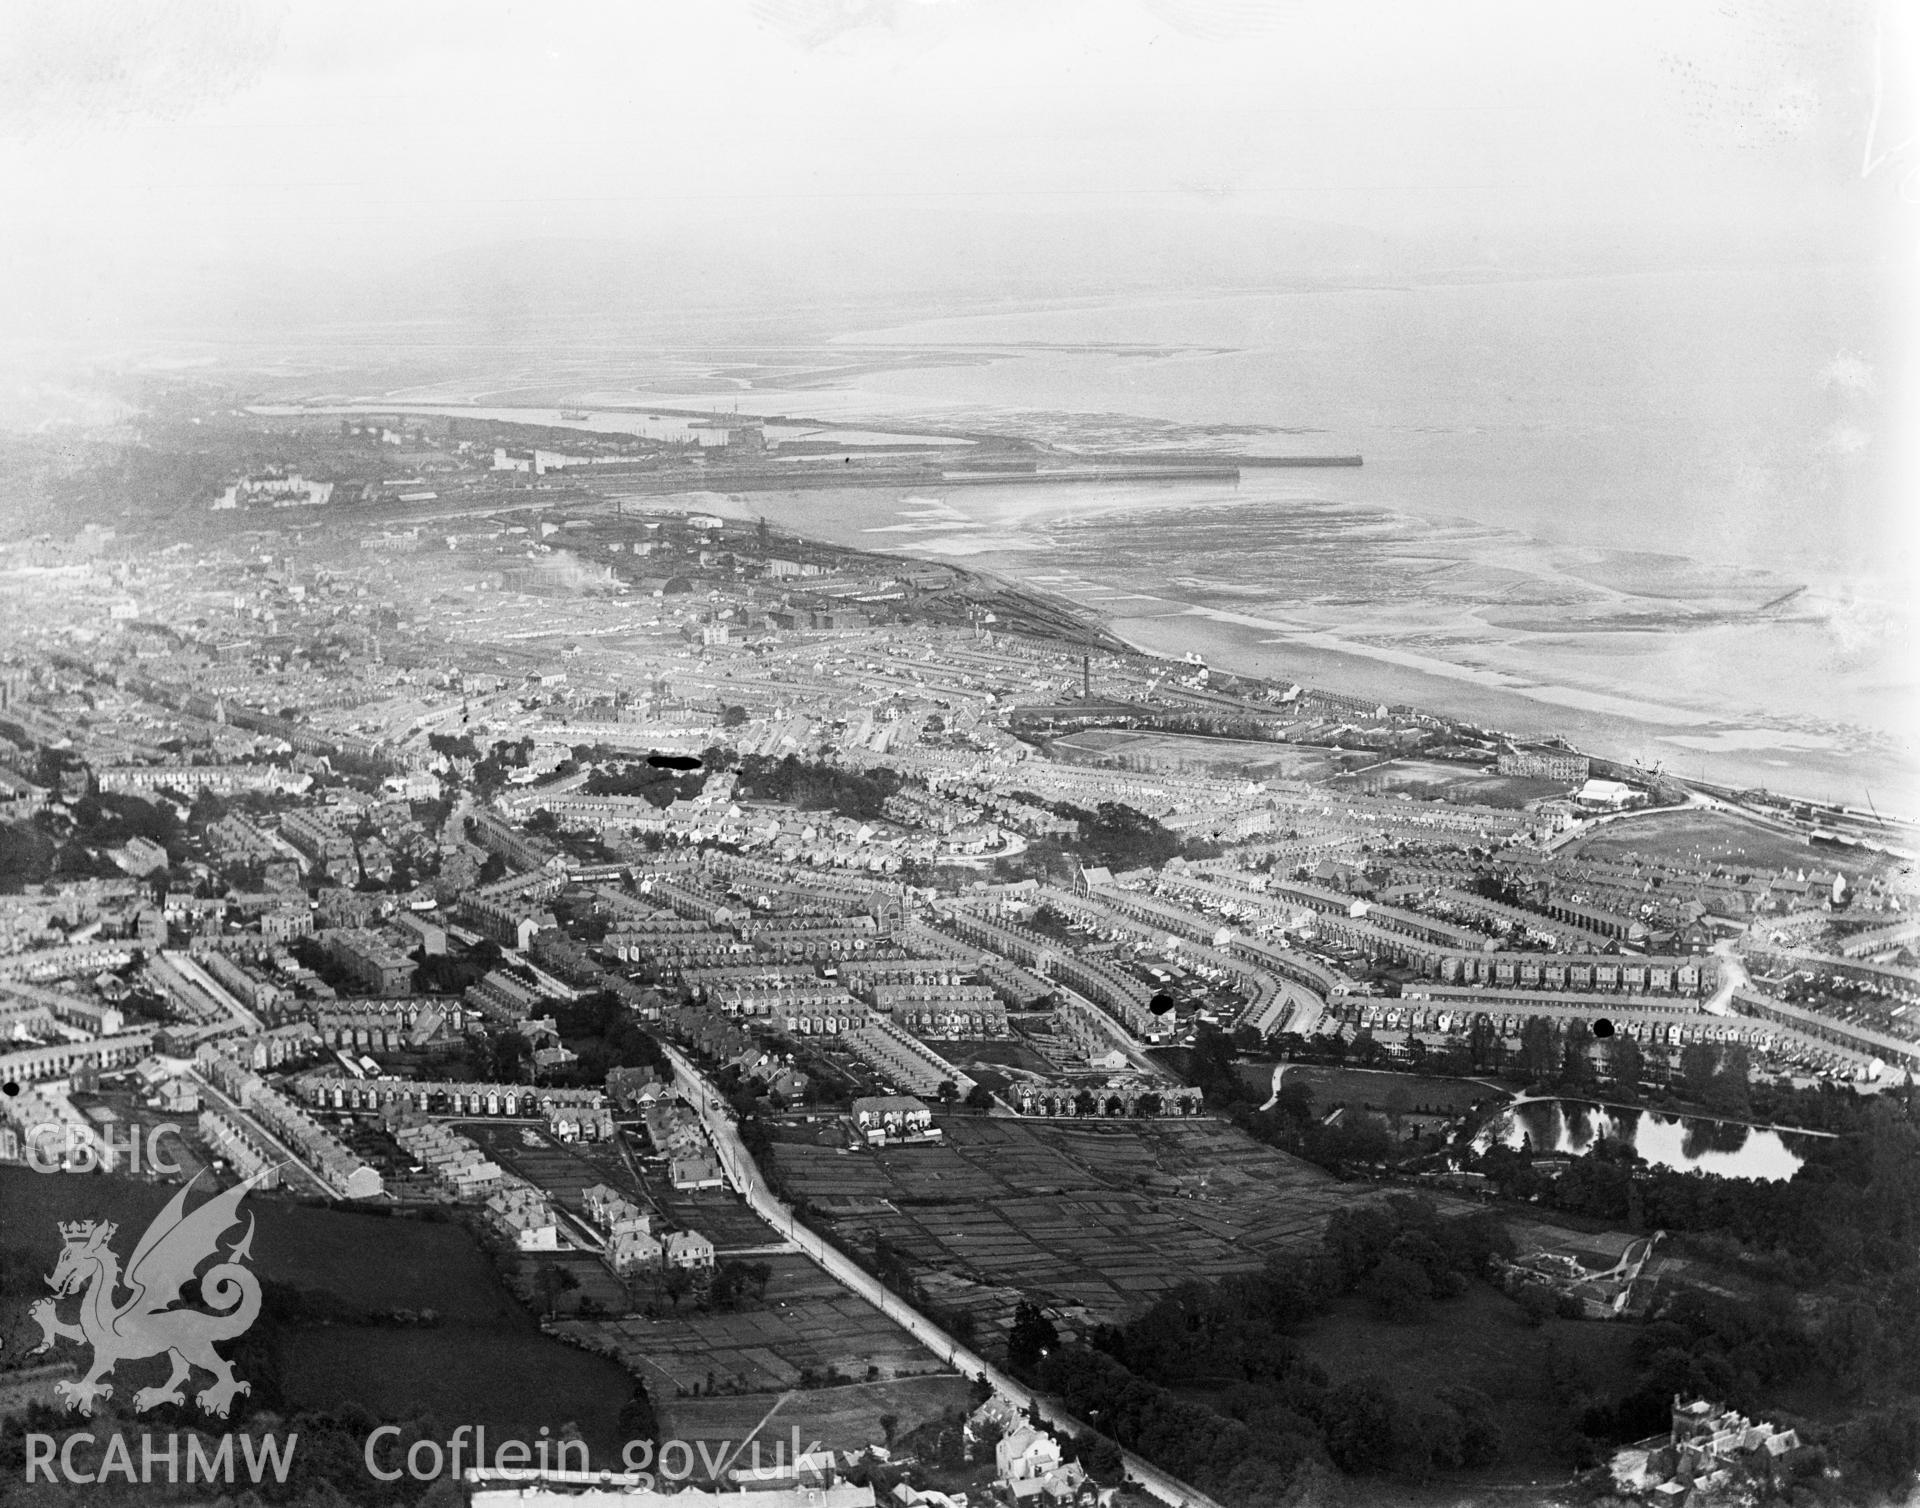 General view of Swansea, oblique aerial view. 5?x4? black and white glass plate negative.